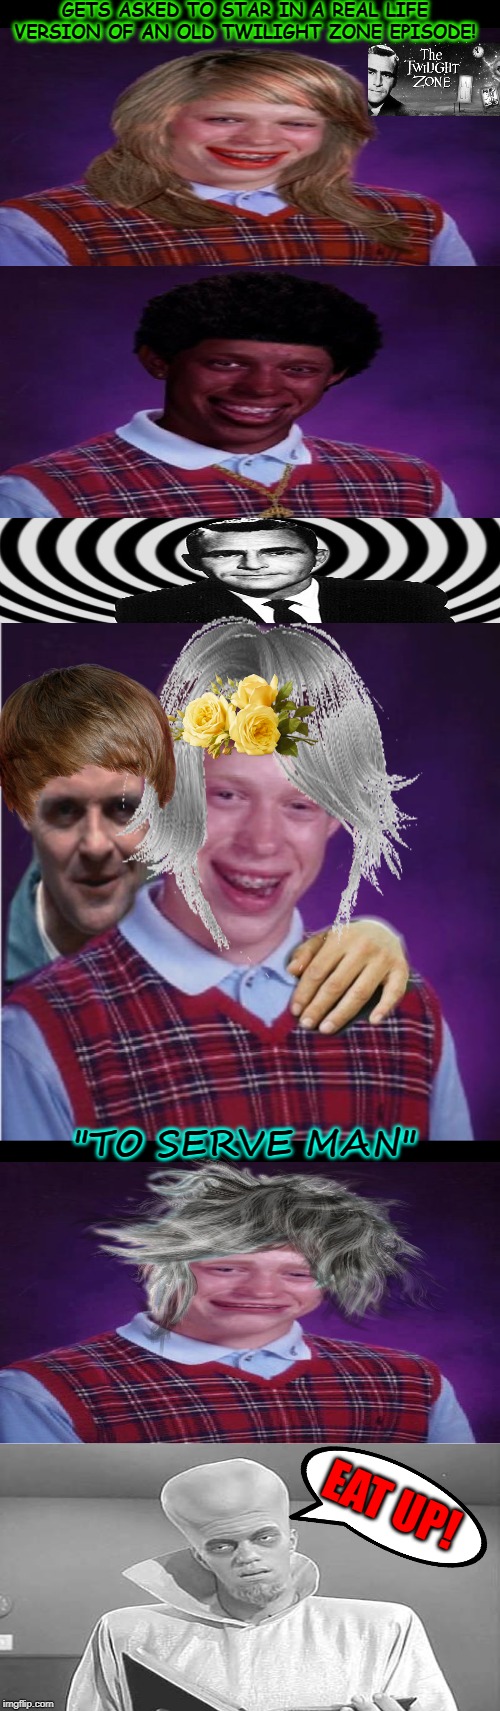 Hannibal Lecter And Bad Luck Brian | GETS ASKED TO STAR IN A REAL LIFE VERSION OF AN OLD TWILIGHT ZONE EPISODE! "TO SERVE MAN"; EAT UP! | image tagged in hannibal lecter and bad luck brian | made w/ Imgflip meme maker